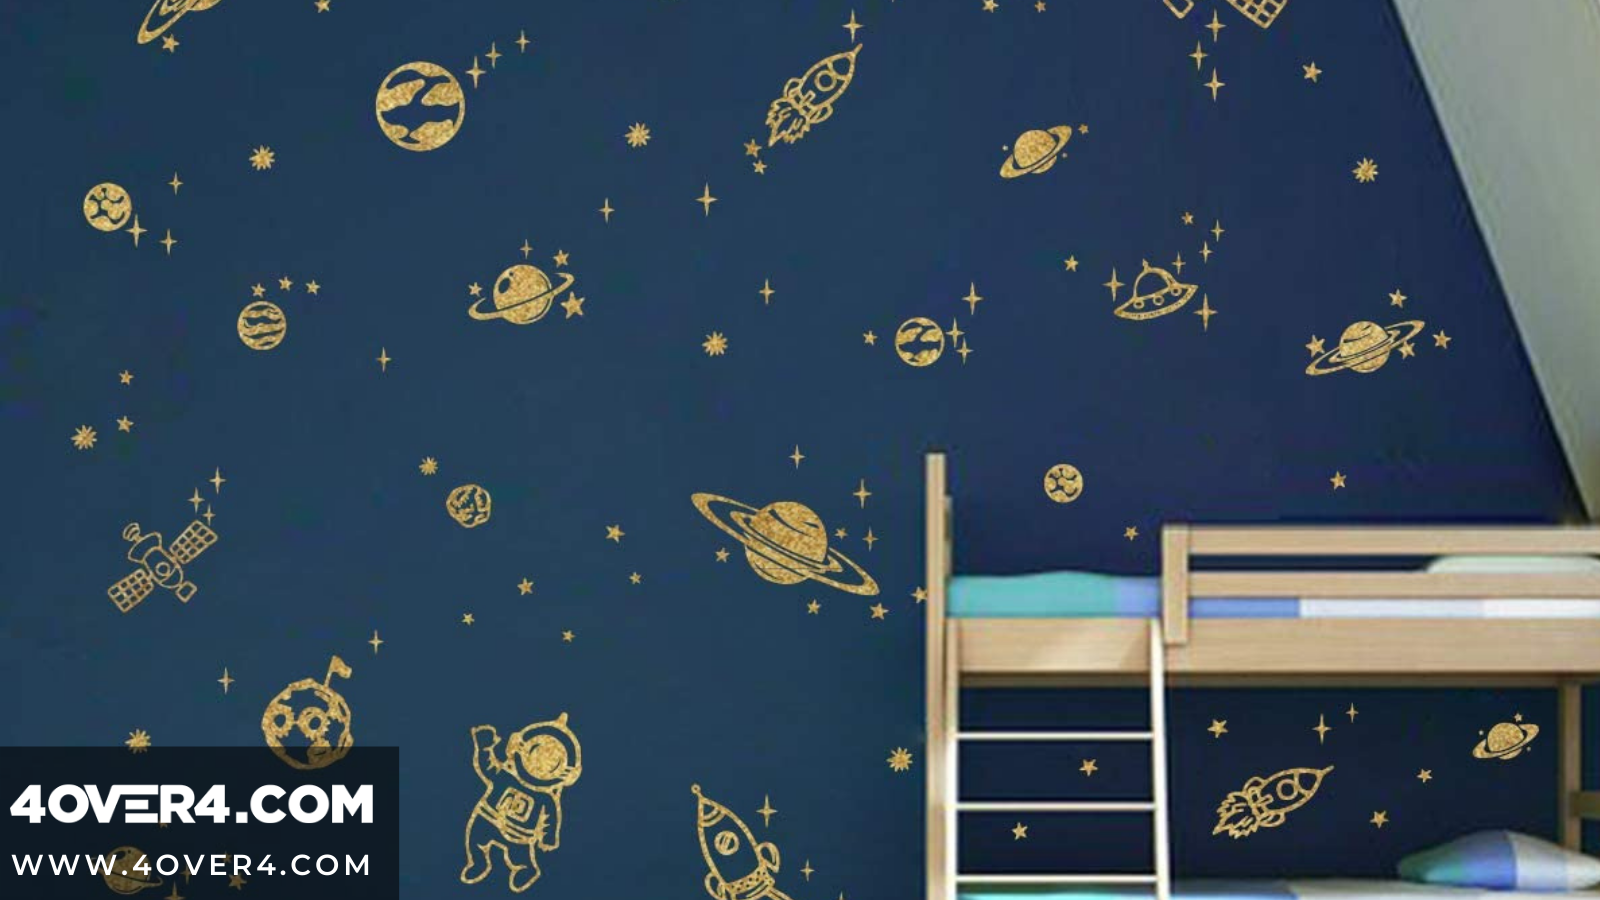 6 Interesting Playroom and Vinyl Stickers For Schools